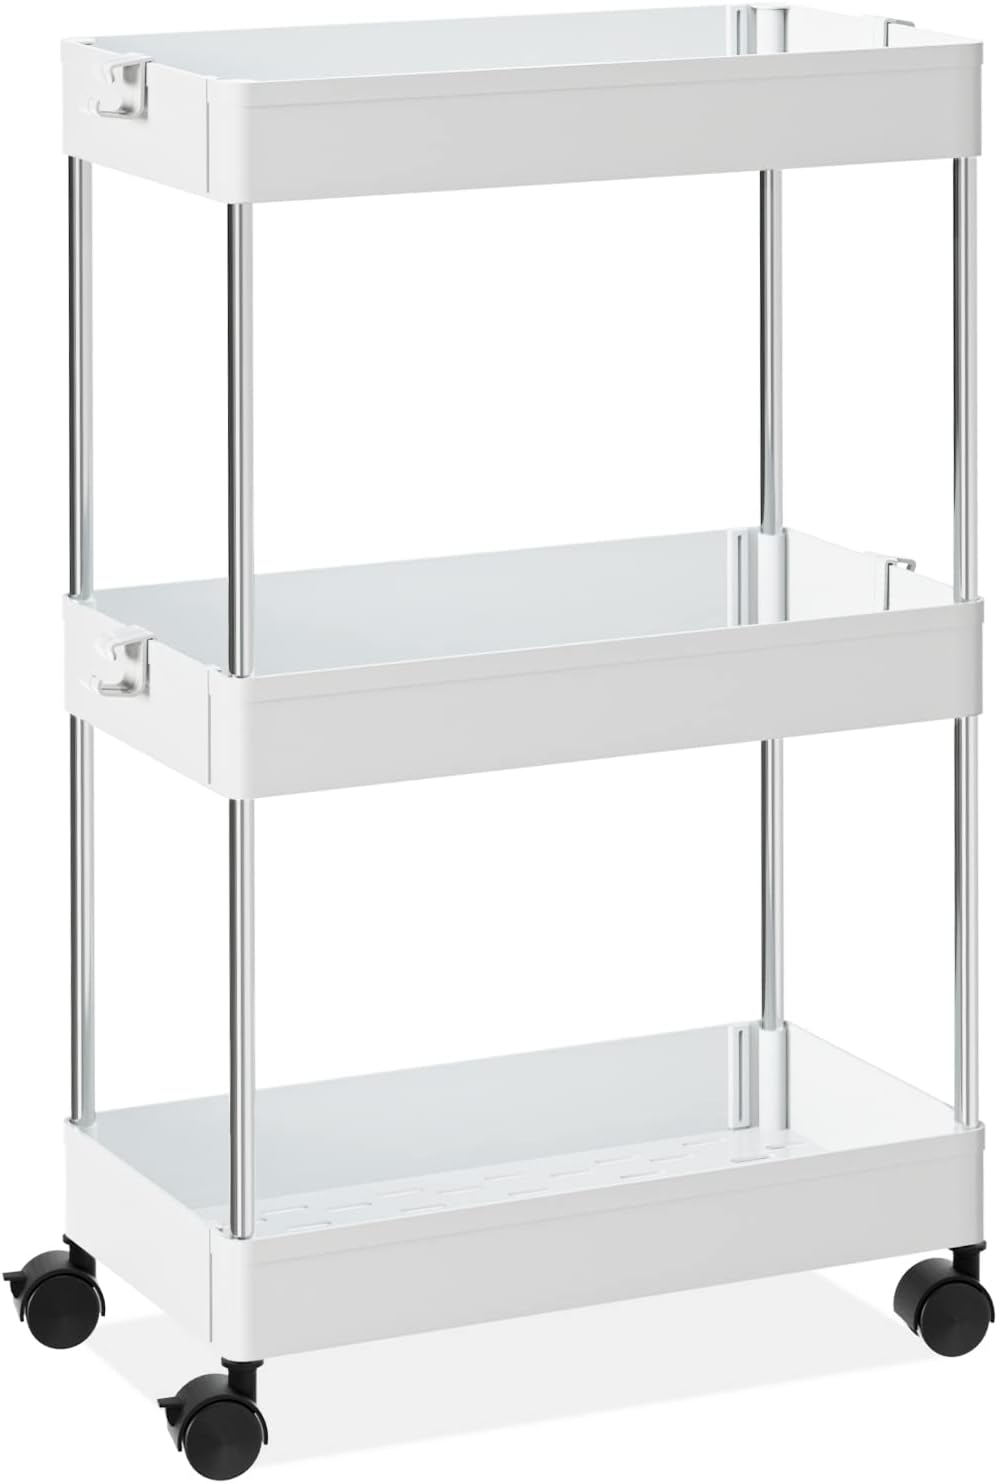 OTK Storage Cart 3 Tier Mobile Shelving Unit Organizer, Utility Rolling Shelf Cart with Wheels for Bathroom Kitchen Bedroom Office Laundry Narrow Places, White